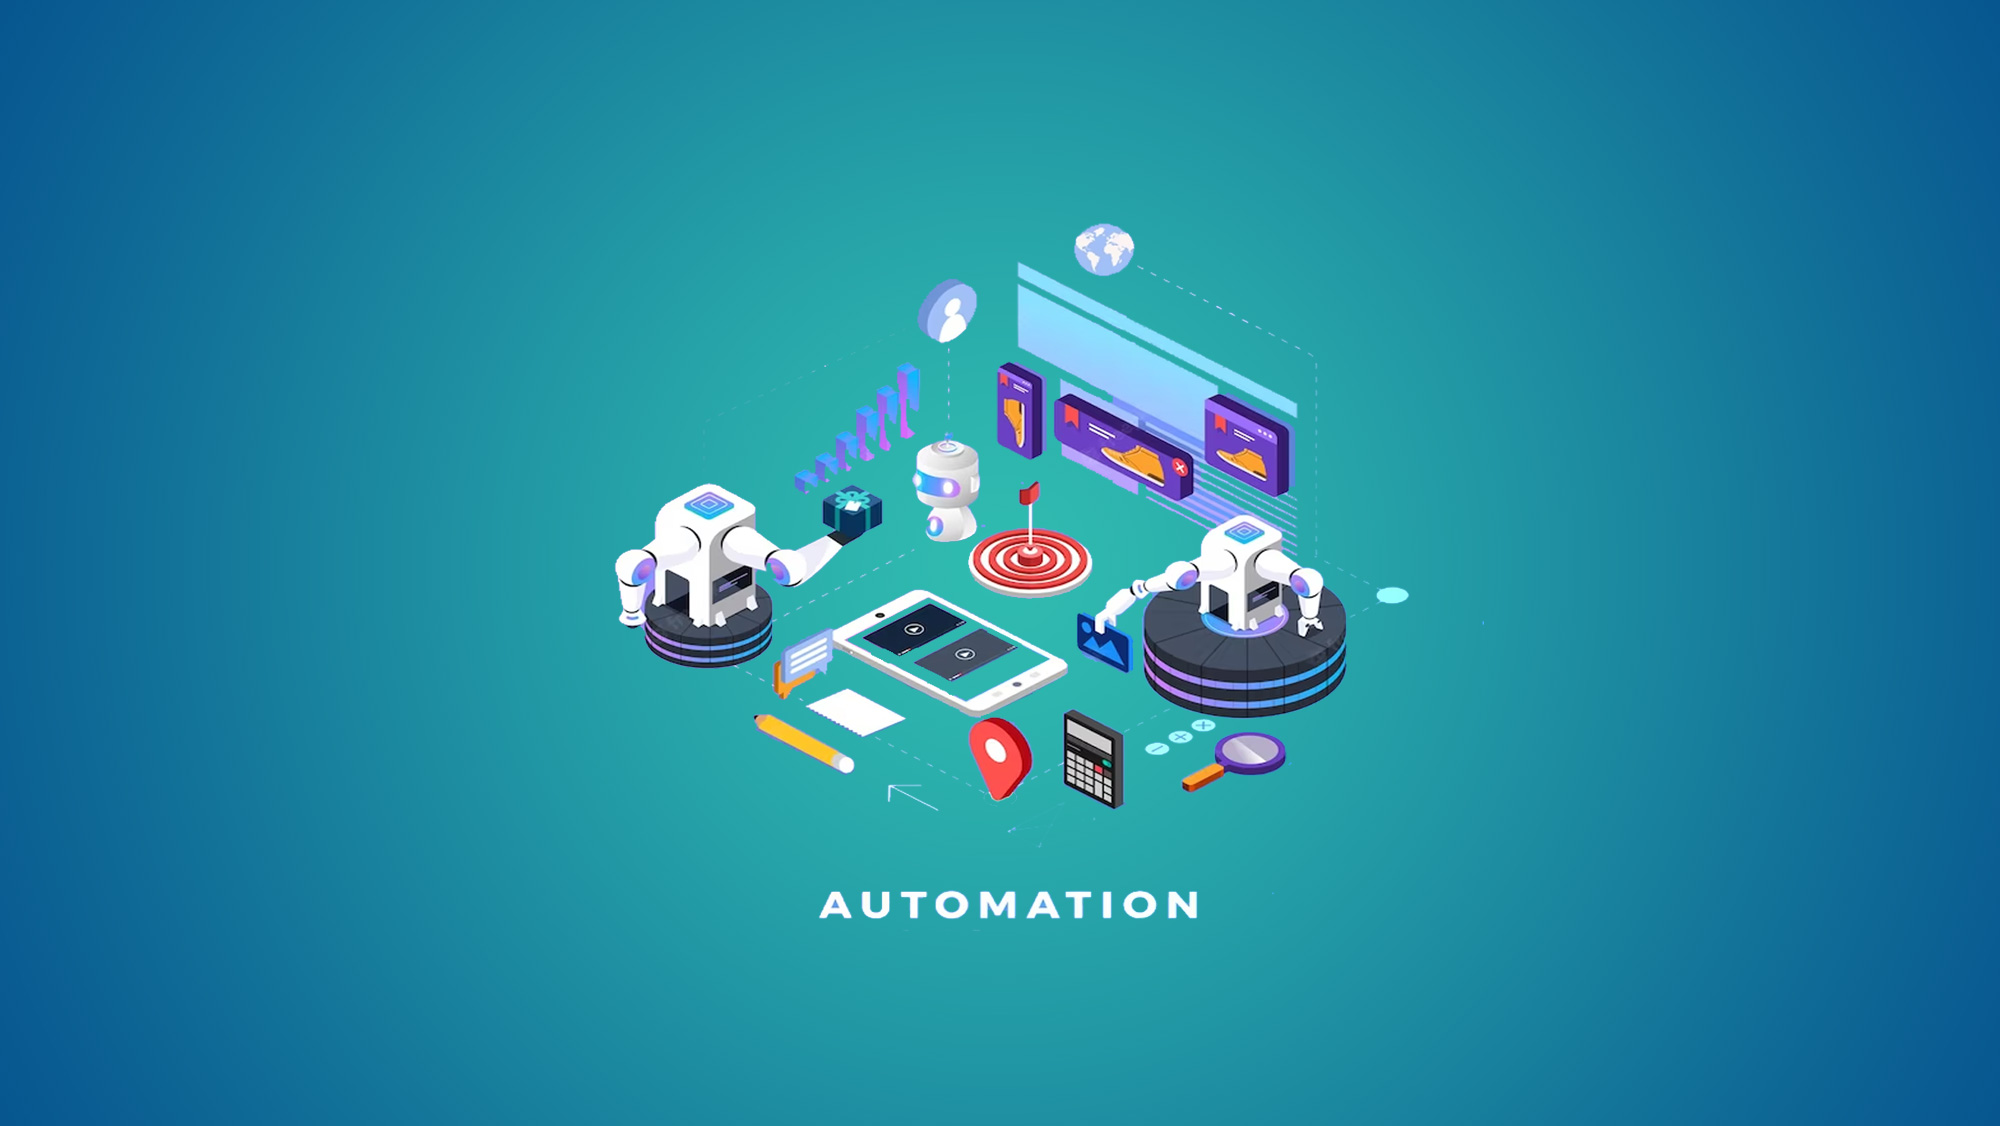 Automate-and-Conquer-WinAutomation-Training-for-Streamlined-Operations